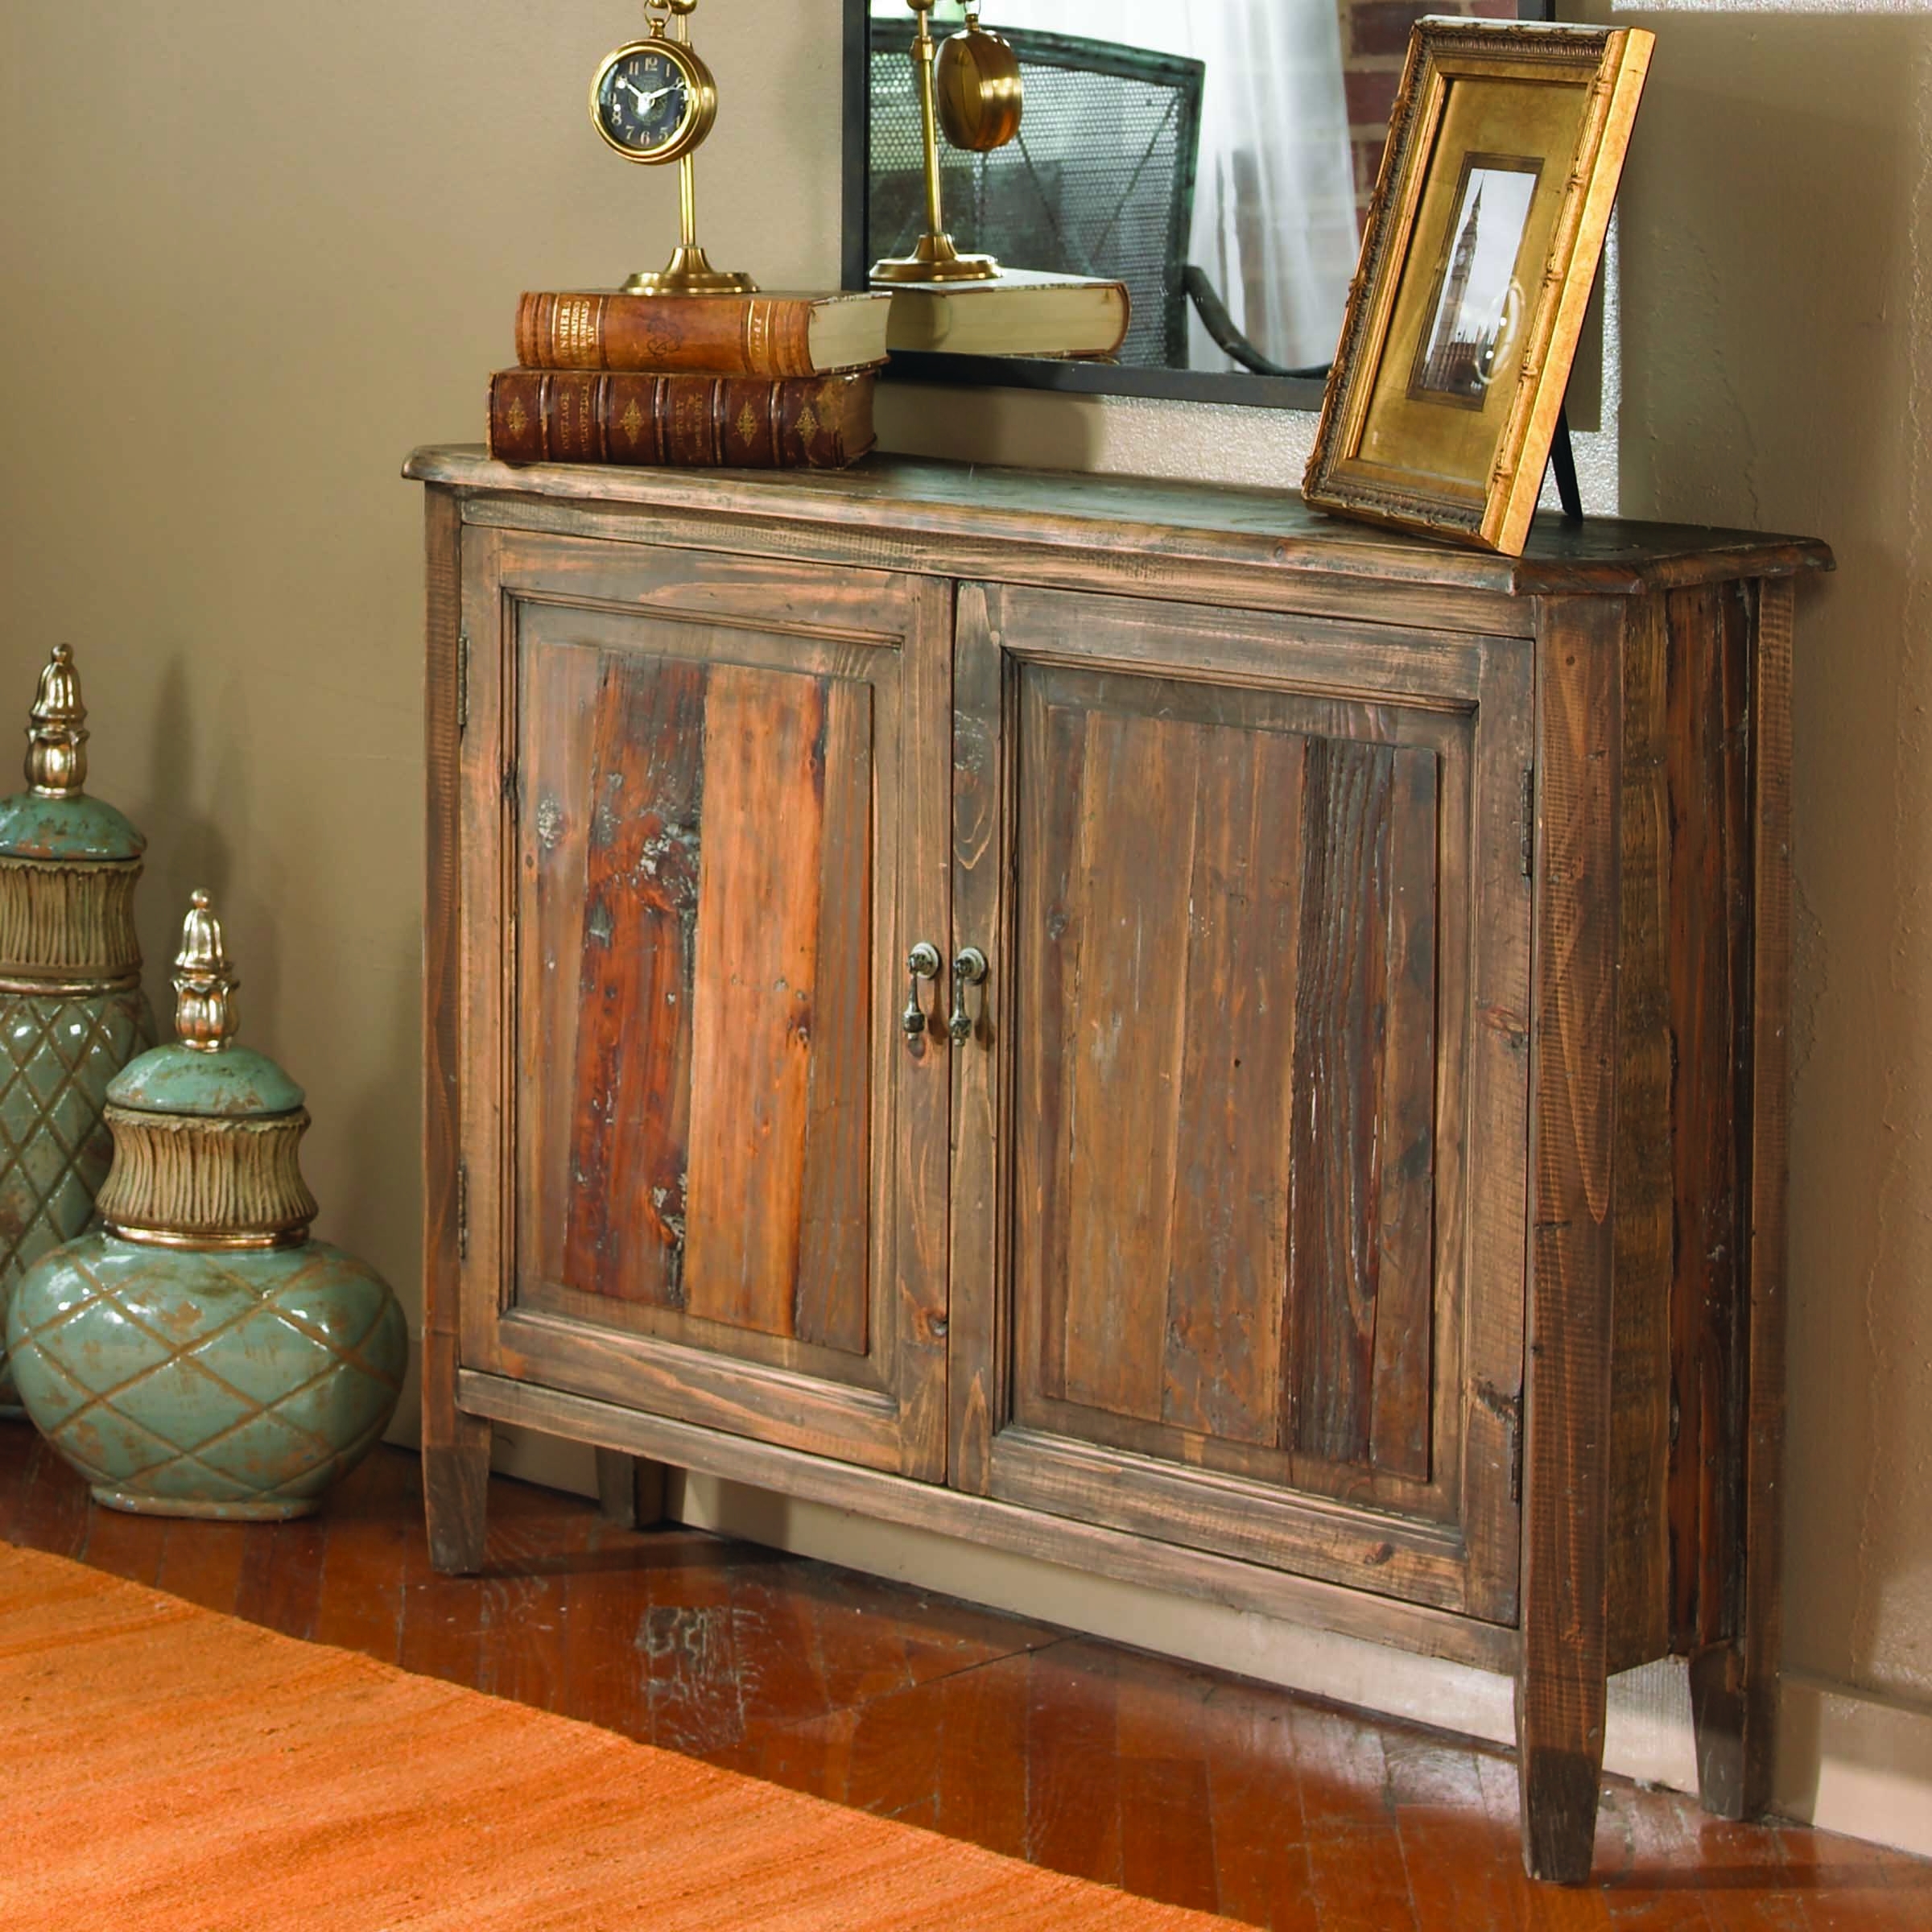 Altair Reclaimed Wood Console Cabinet - Image 1